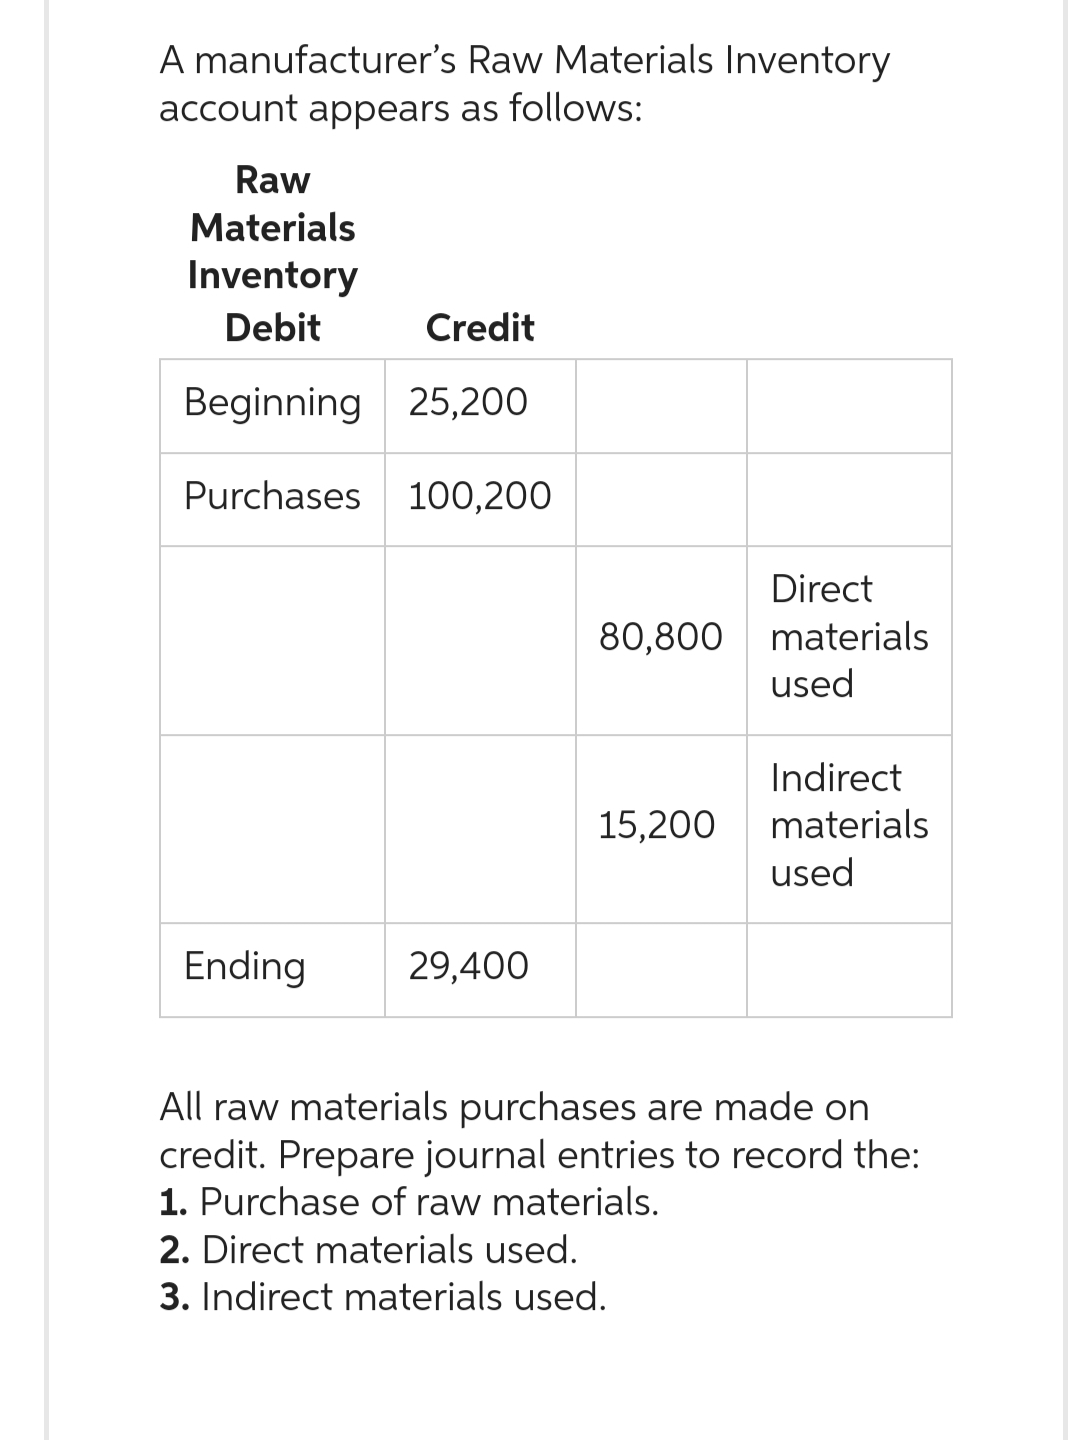 A manufacturer's
account appears as follows:
Raw Materials Inventory
Raw
Materials
Inventory
Debit
Credit
Beginning 25,200
Purchases 100,200
Ending
29,400
Direct
80,800 materials
used
15,200
Indirect
materials
used
All raw materials purchases are made on
credit. Prepare journal entries to record the:
1. Purchase of raw materials.
2. Direct materials used.
3. Indirect materials used.